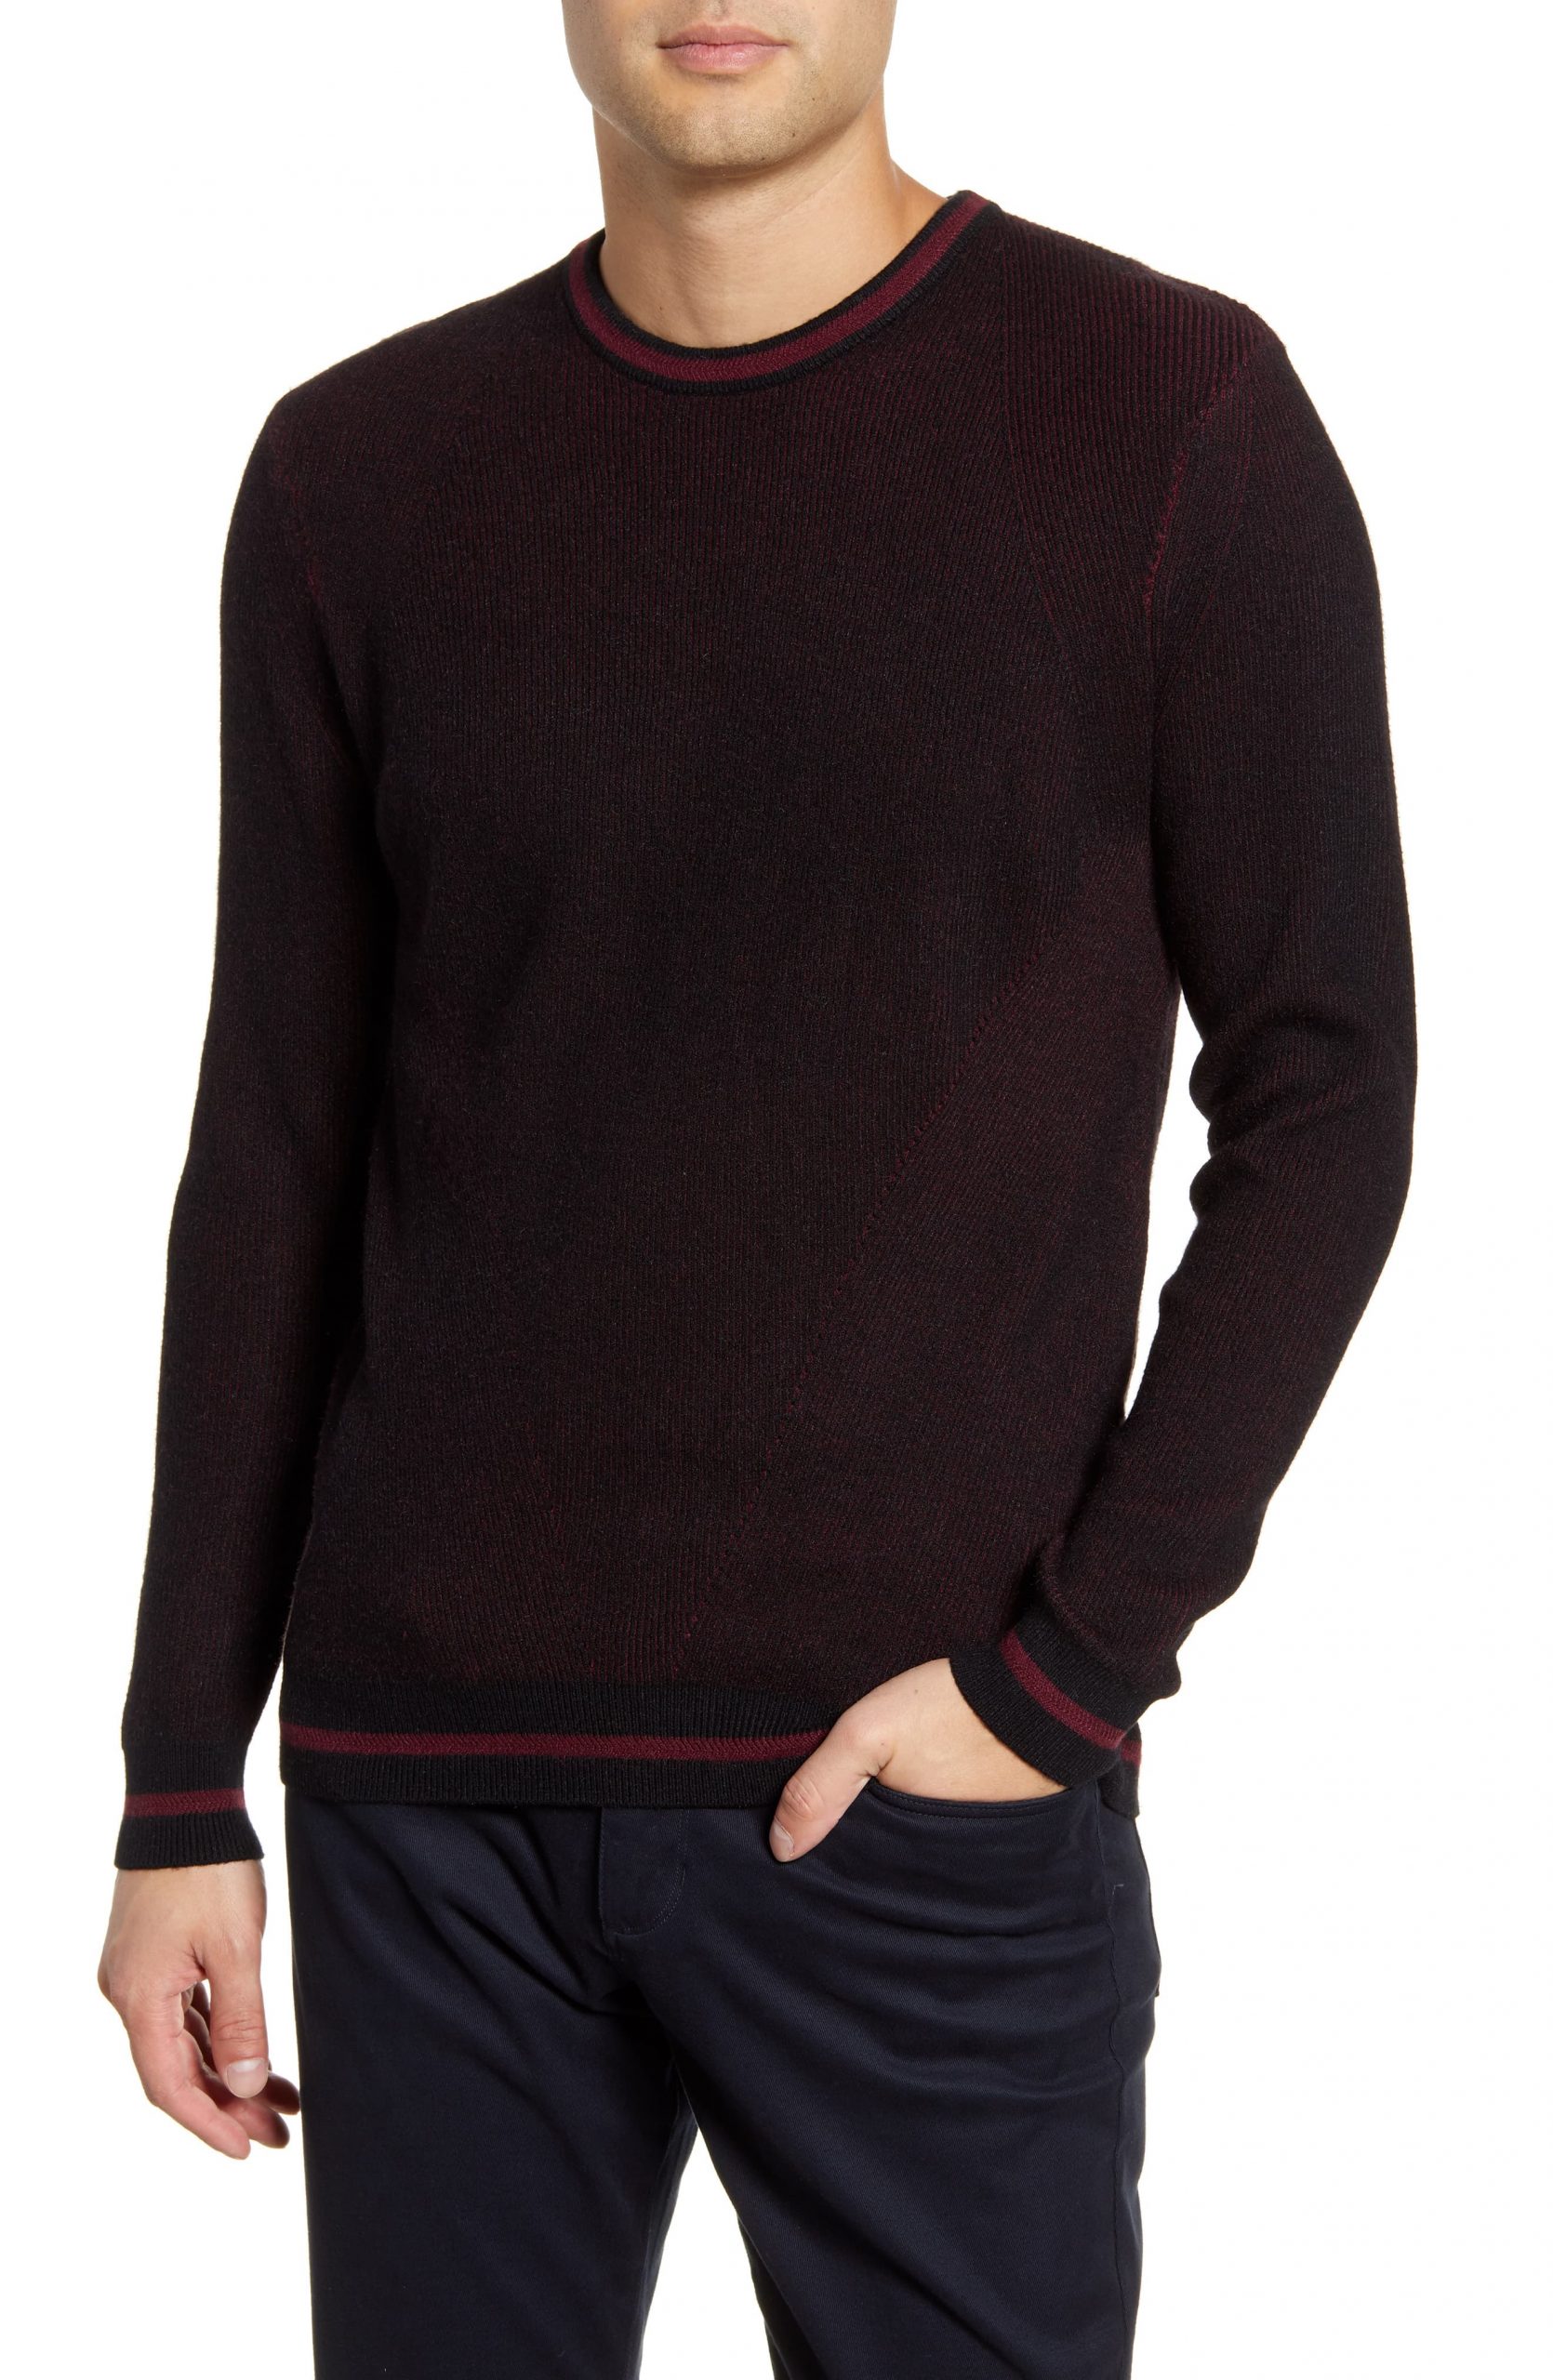 Men’s Vince Camuto Slim Fit Tipped Crewneck Sweater, Size Small – Black ...